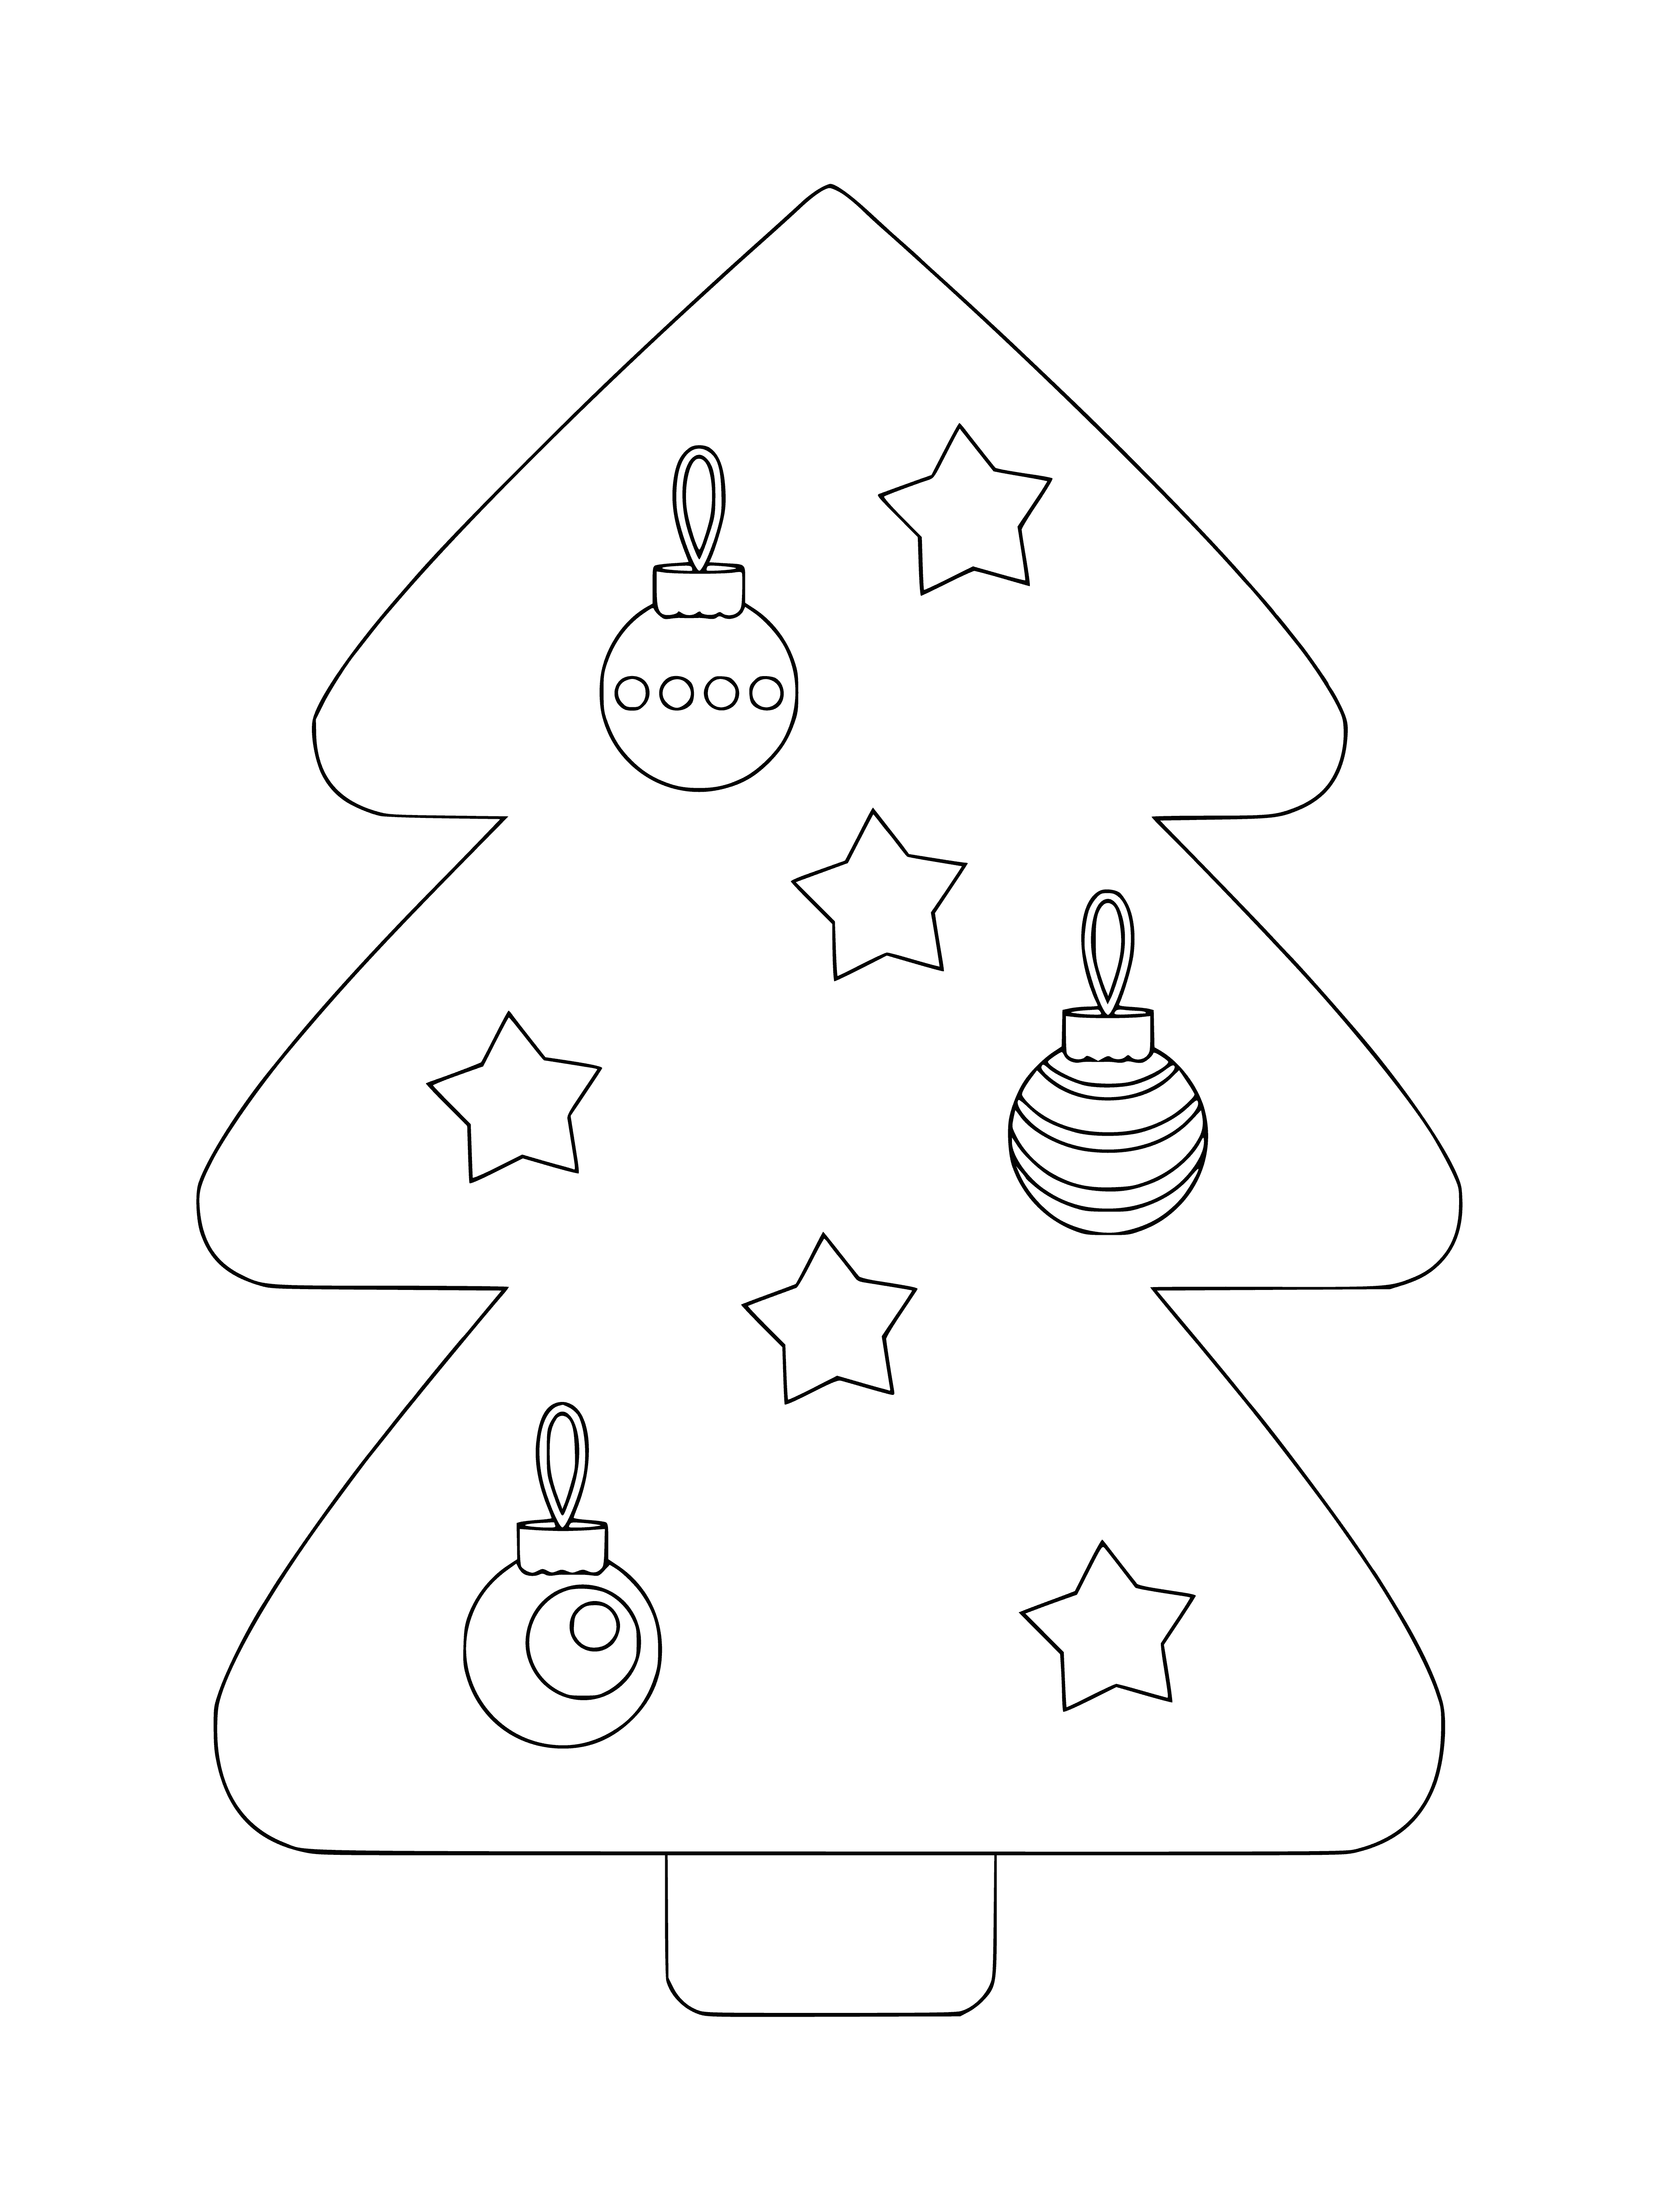 coloring page: Decorated Christmas tree w/ ornaments, lights & star, surrounded by presents.